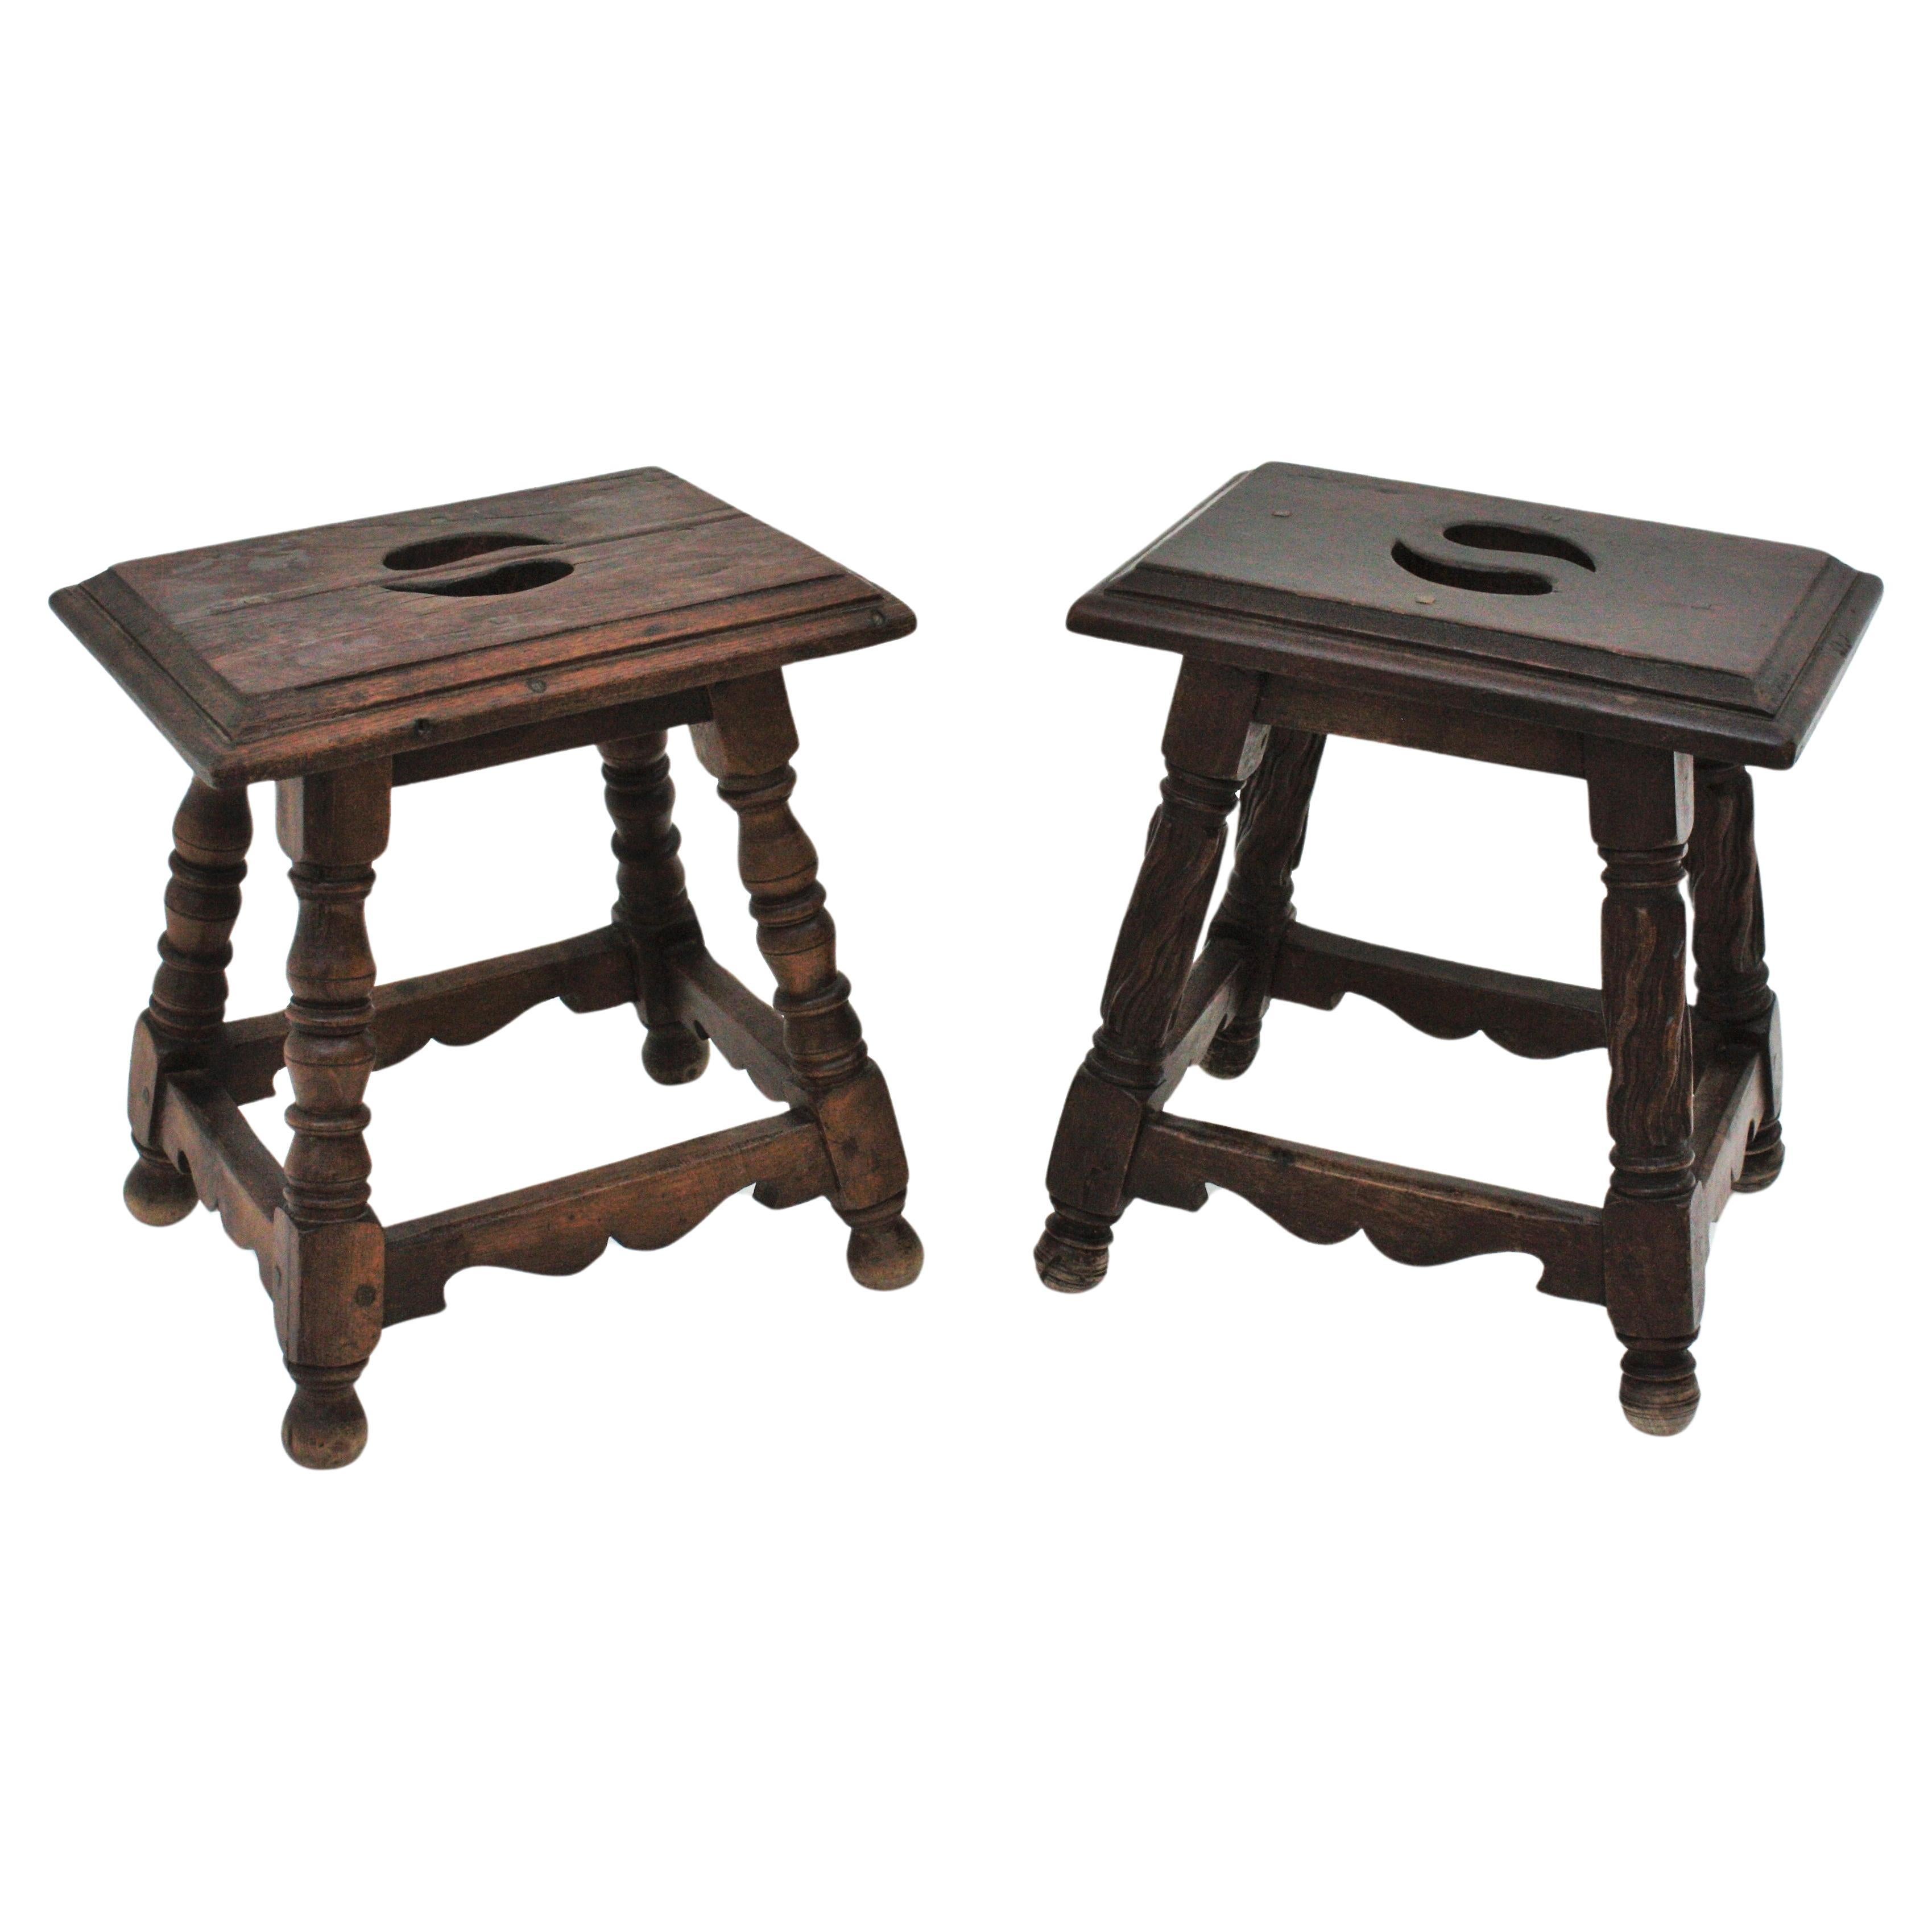 Pair of Spanish Colonial Side Tables / Stools in Carved Wood, 1940s